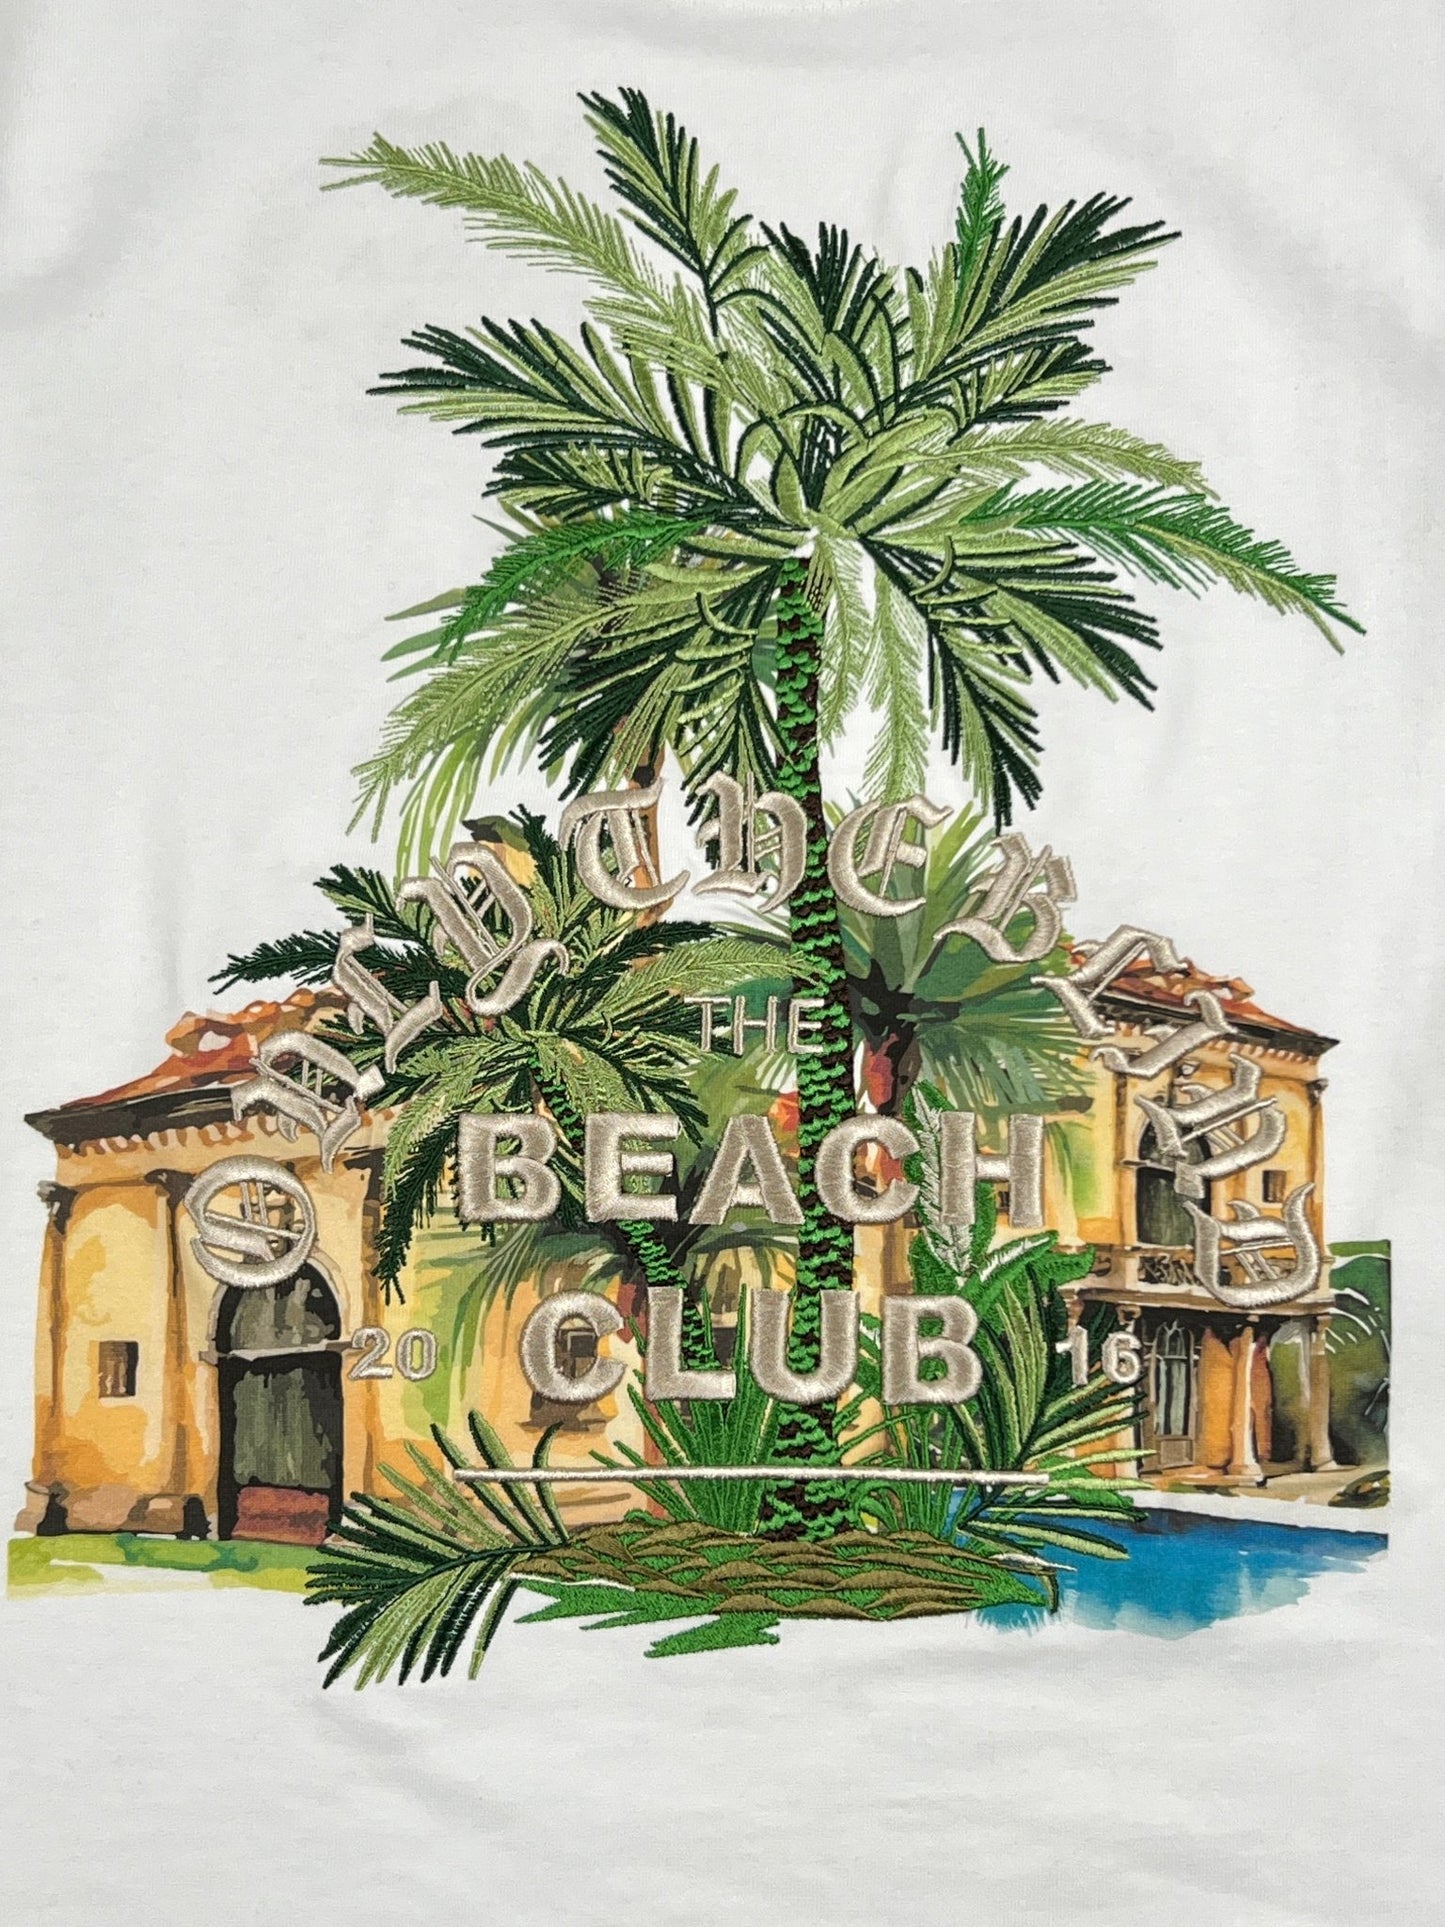 A white t-shirt with an image of a ONLY THE BLIND desert palm tree and a house.